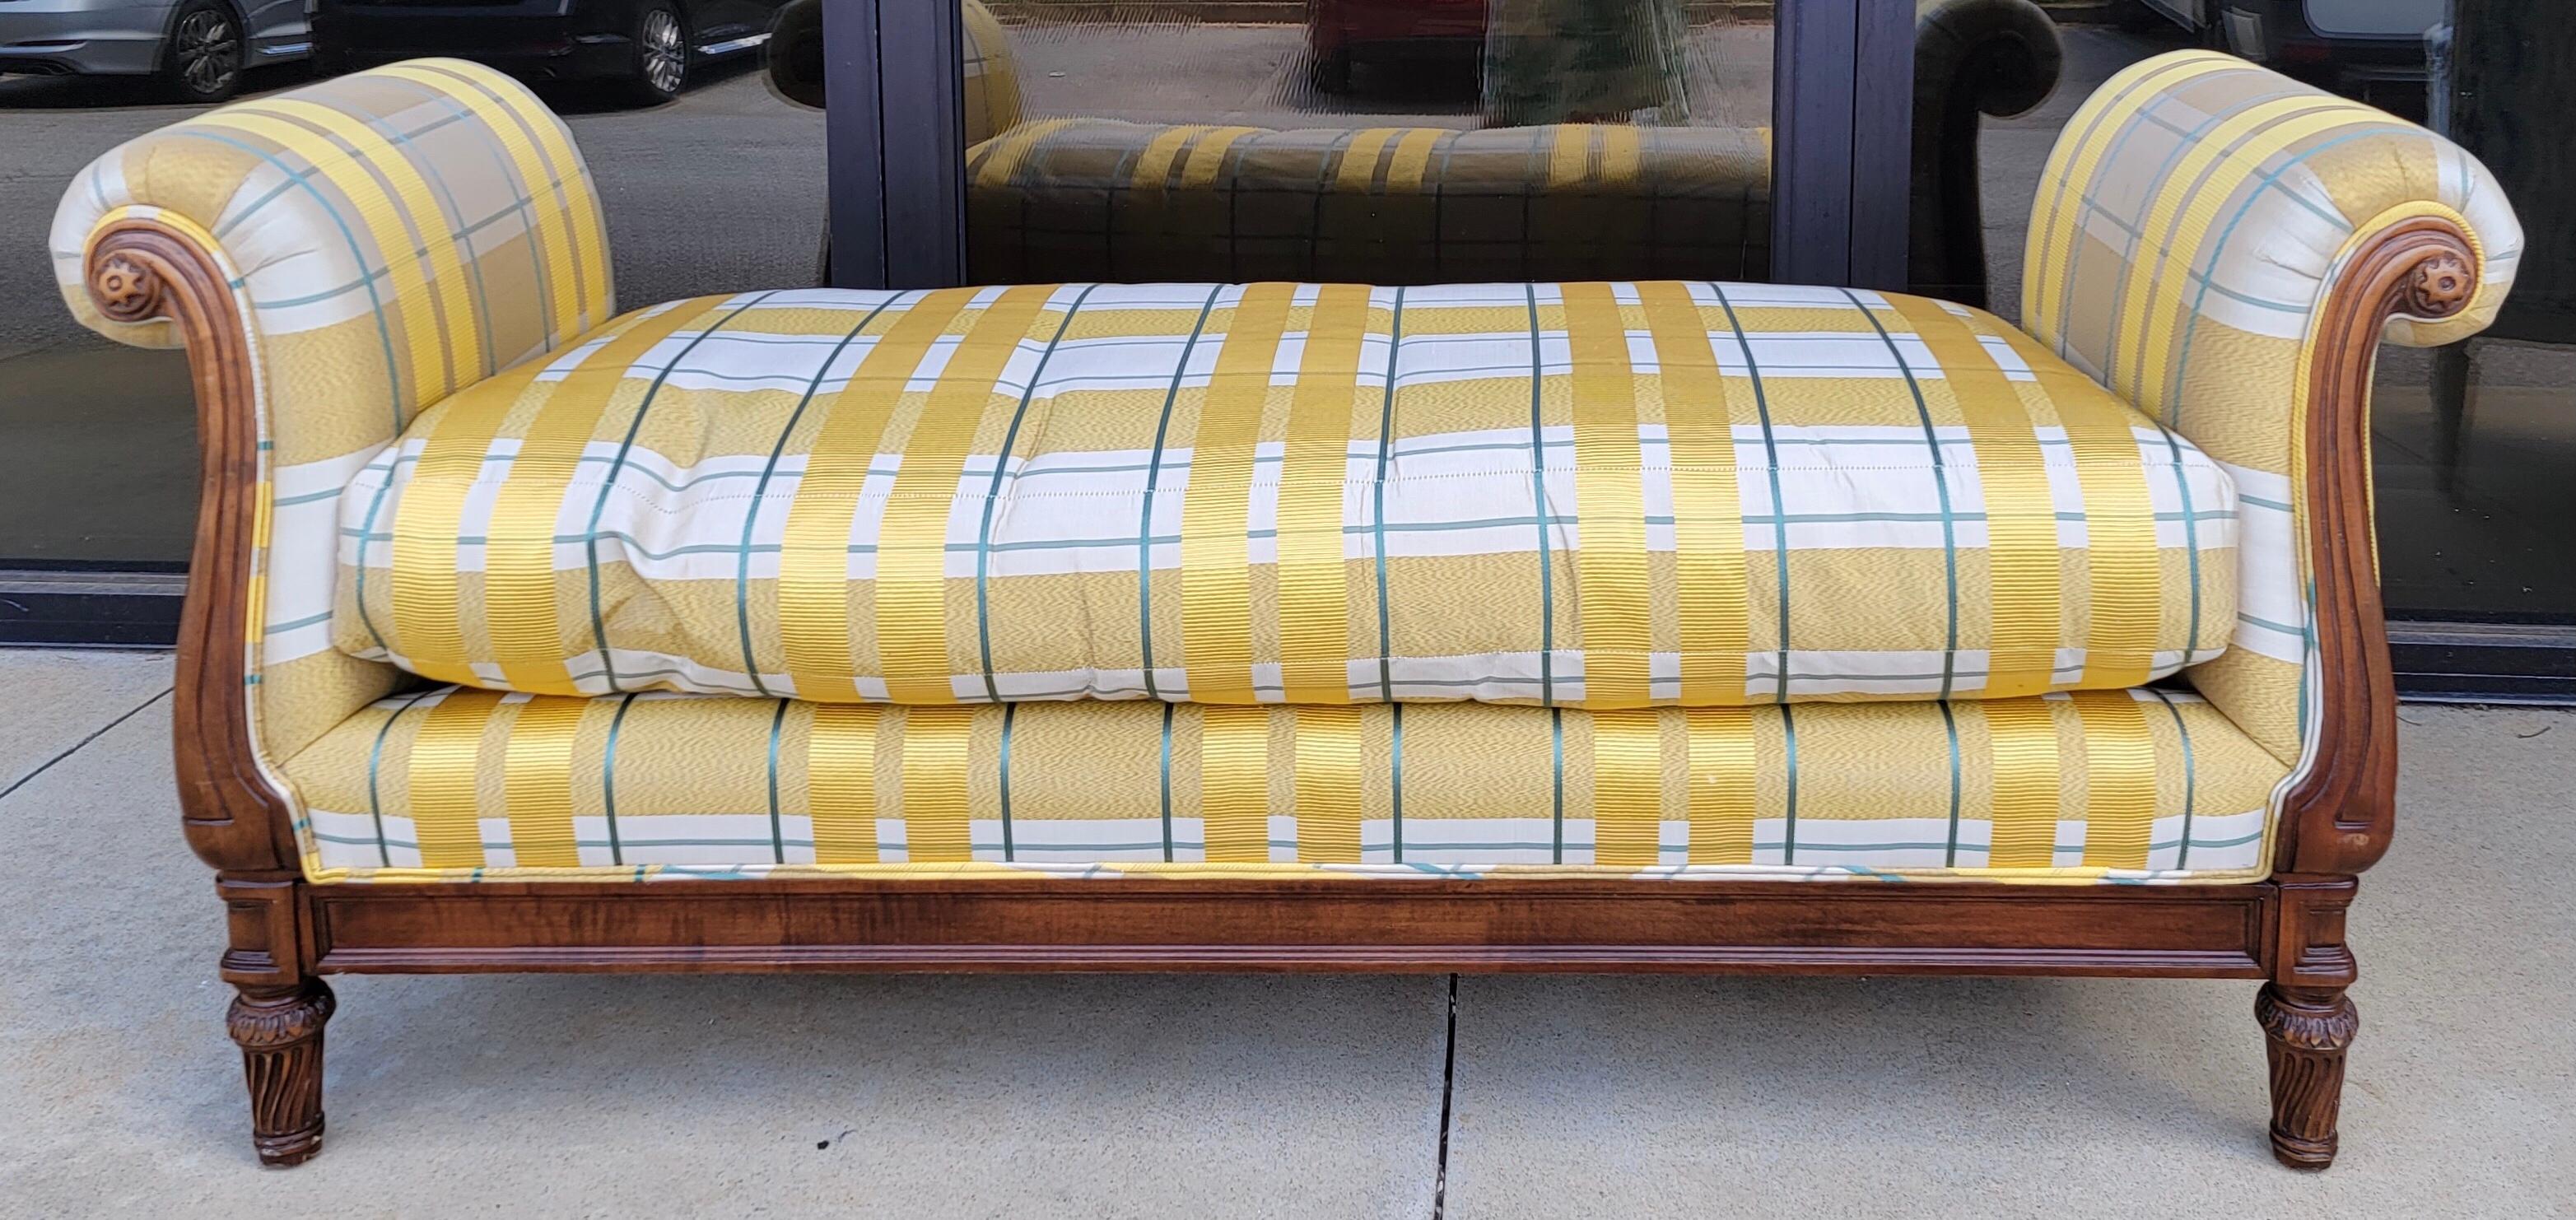 20th Century Late 20th-C. Regency Style Mahogany Upholstered Daybed / Bench / Chaise